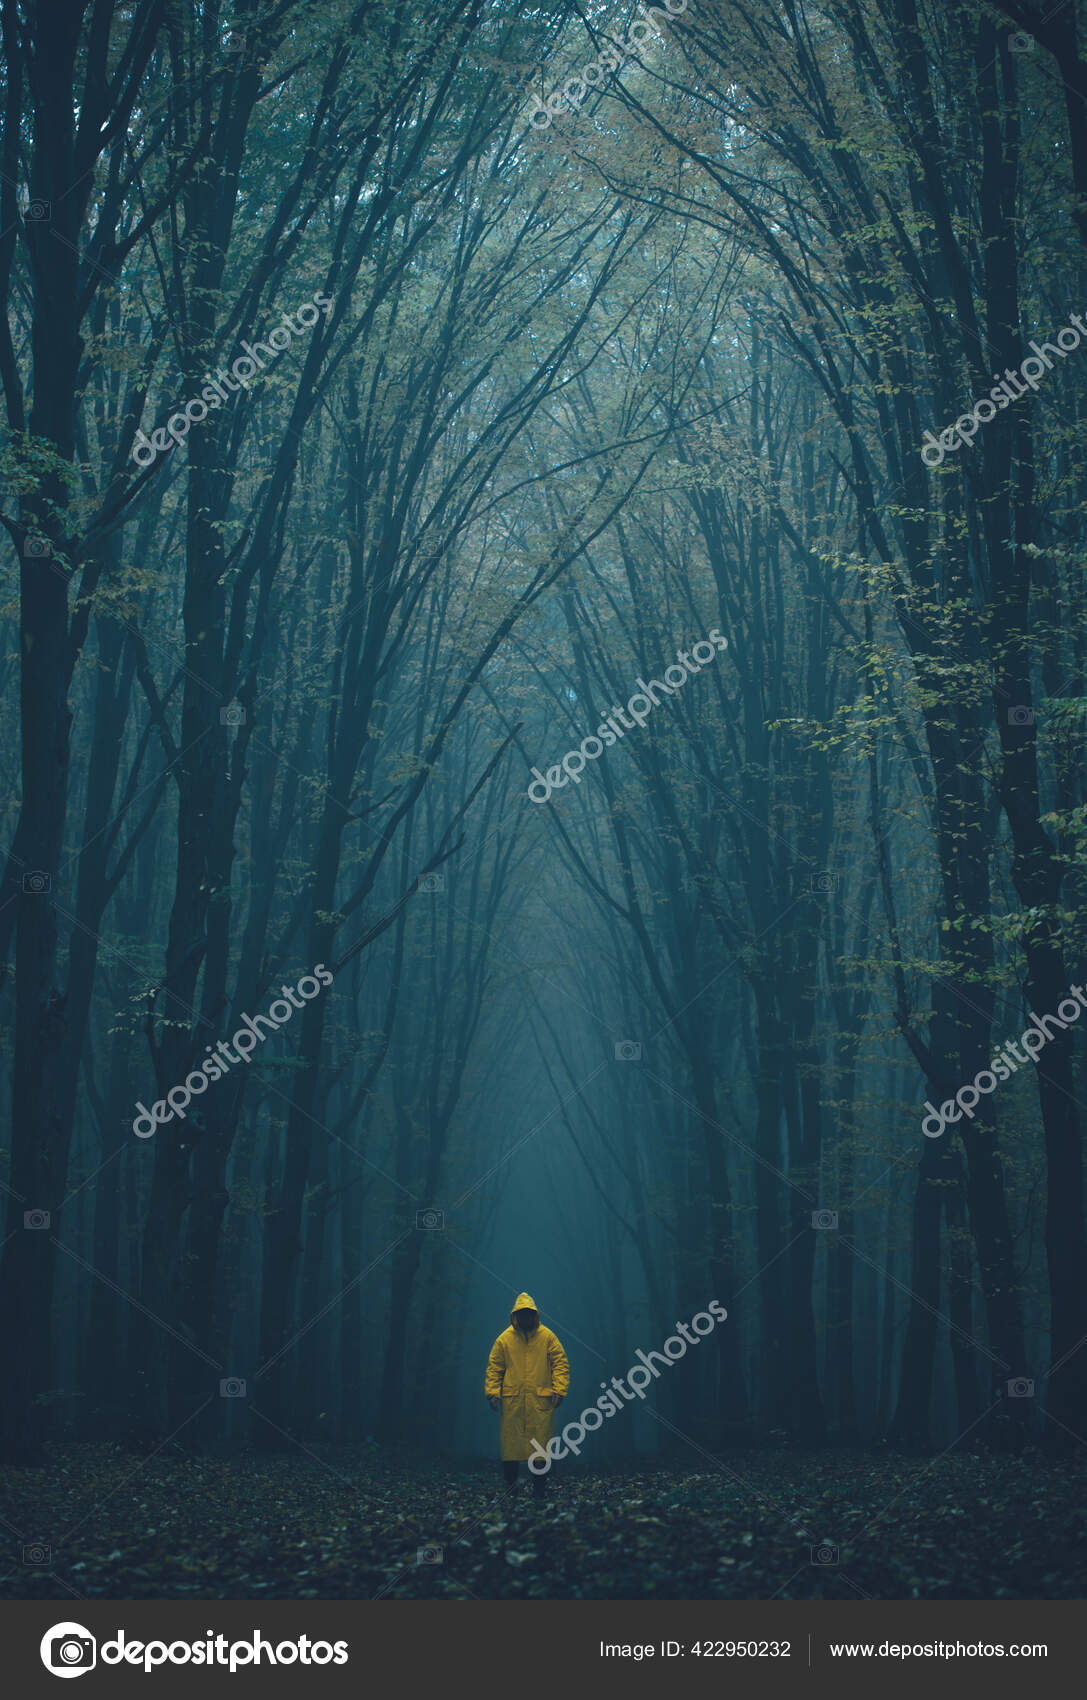 Lost in the cold dark forest